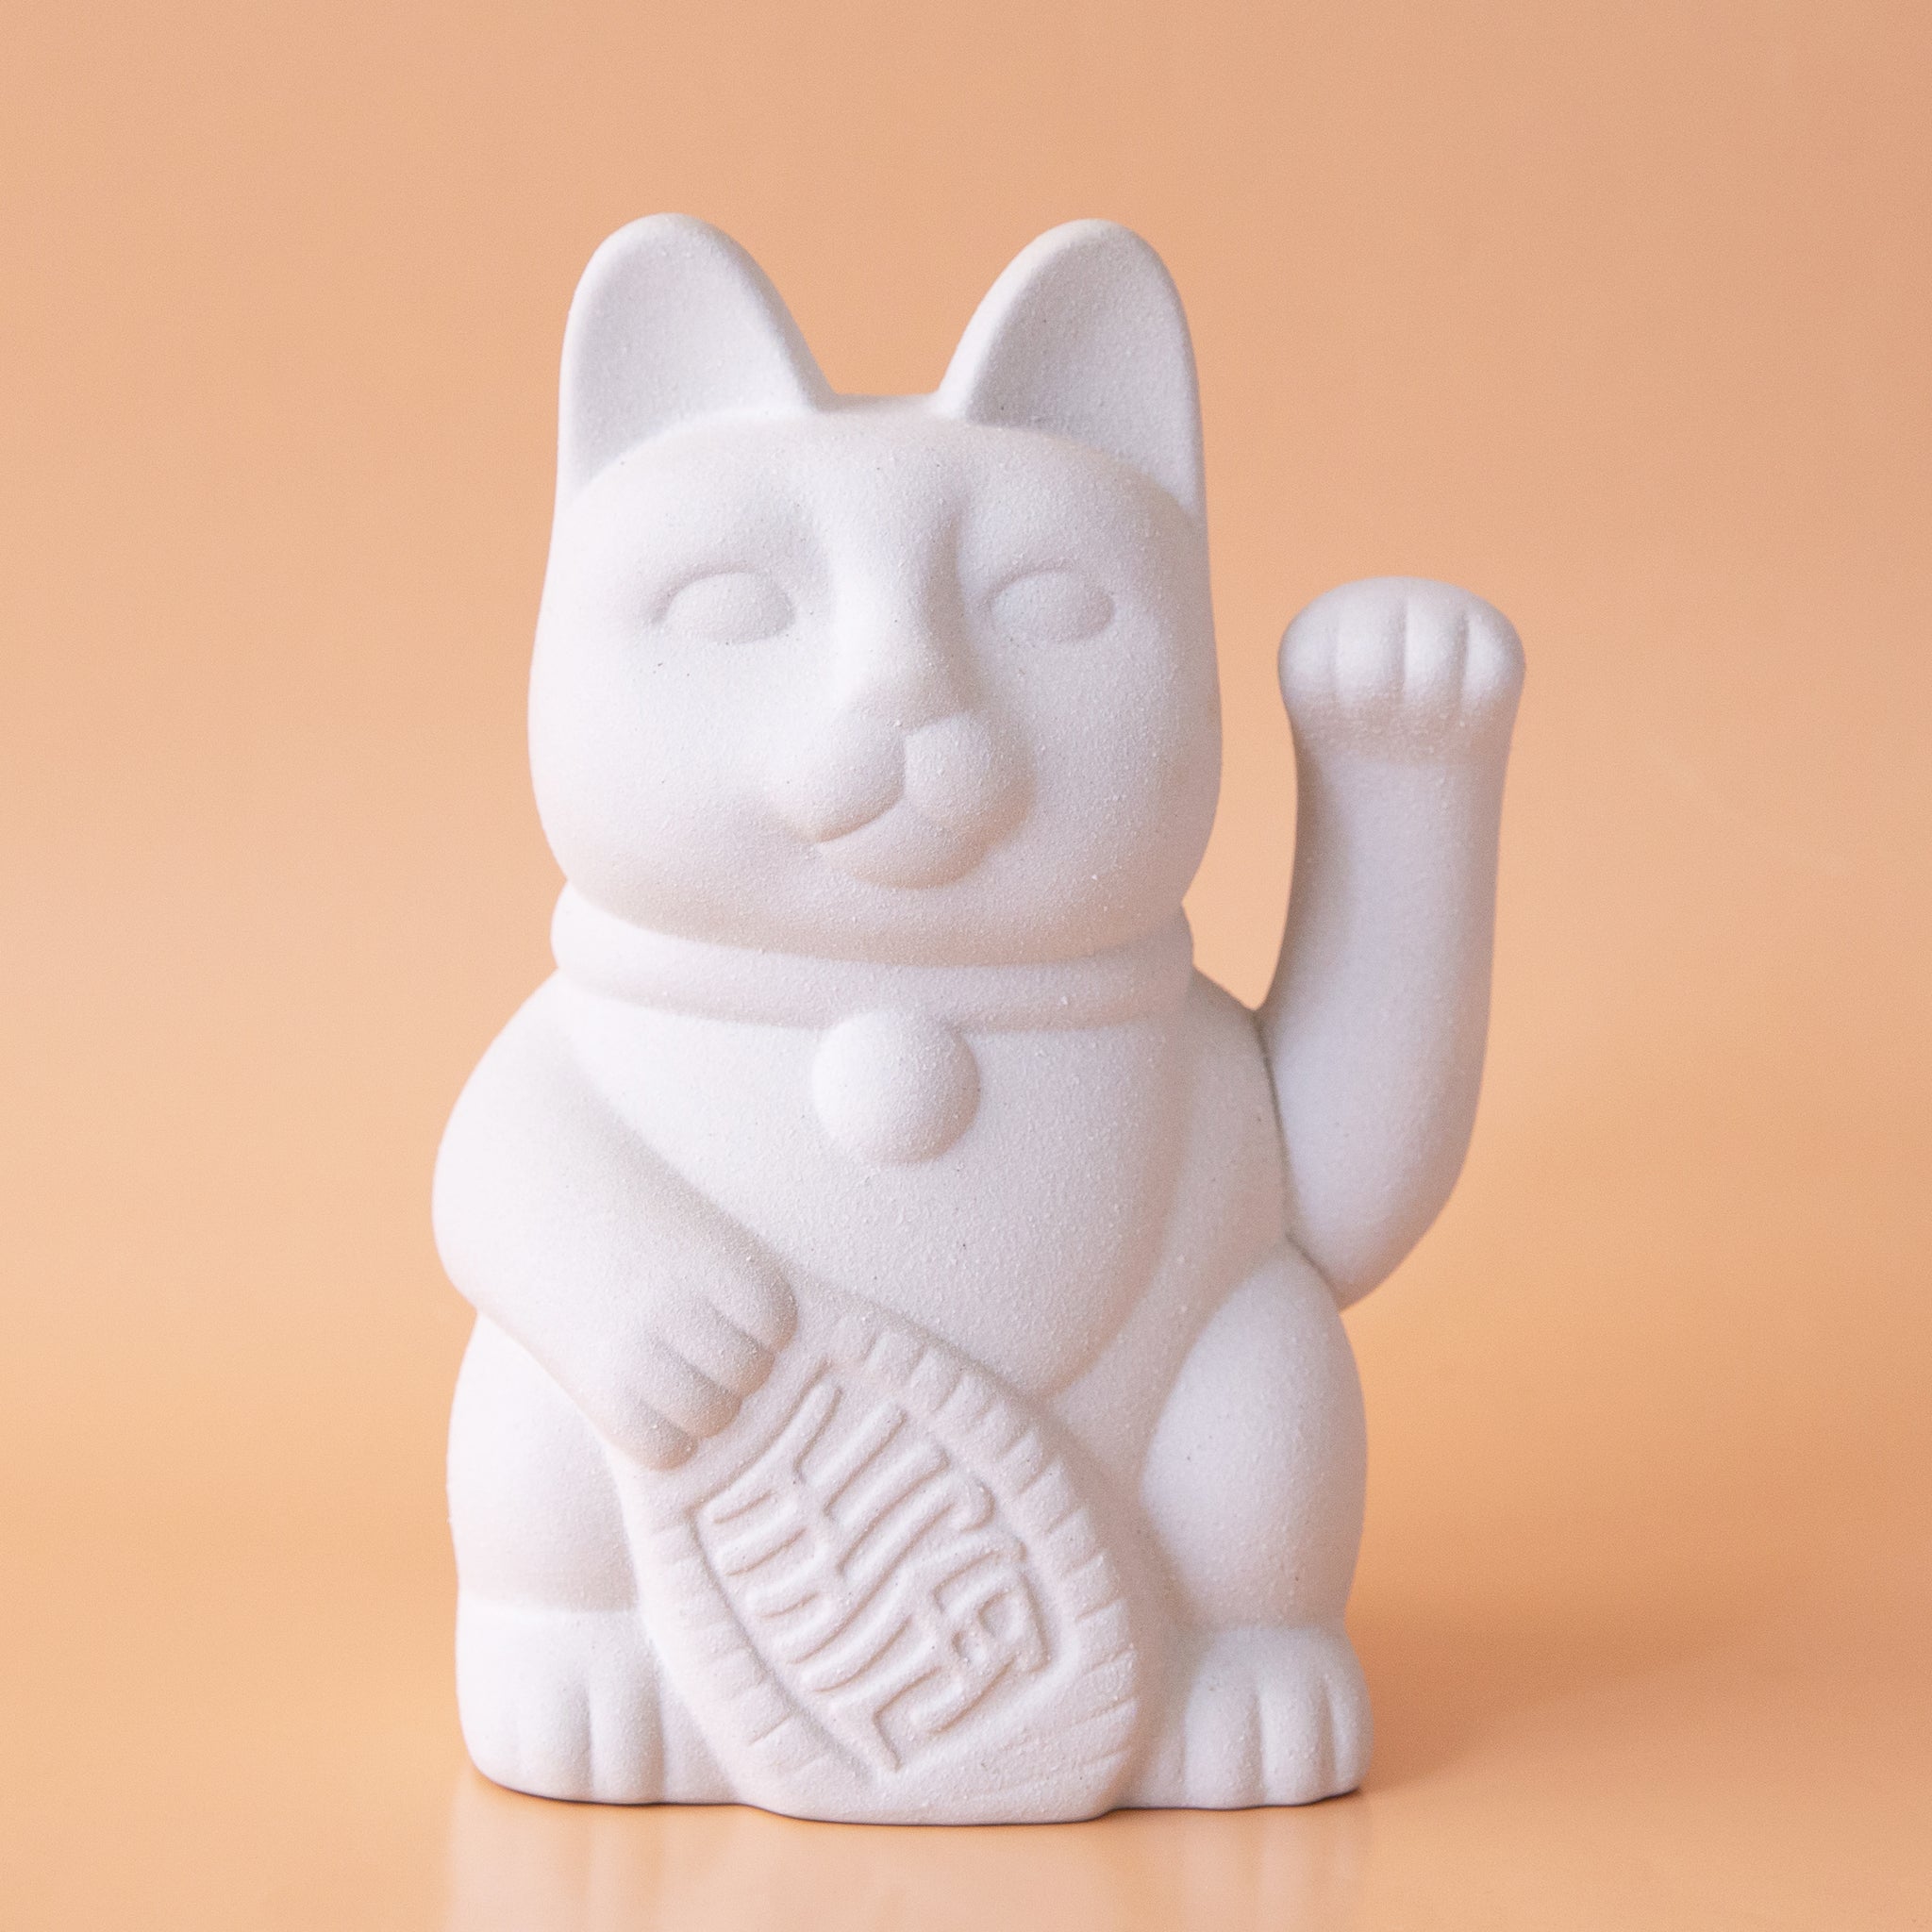 A ceramic lucky cat vase in white with its paw up in the waving position.